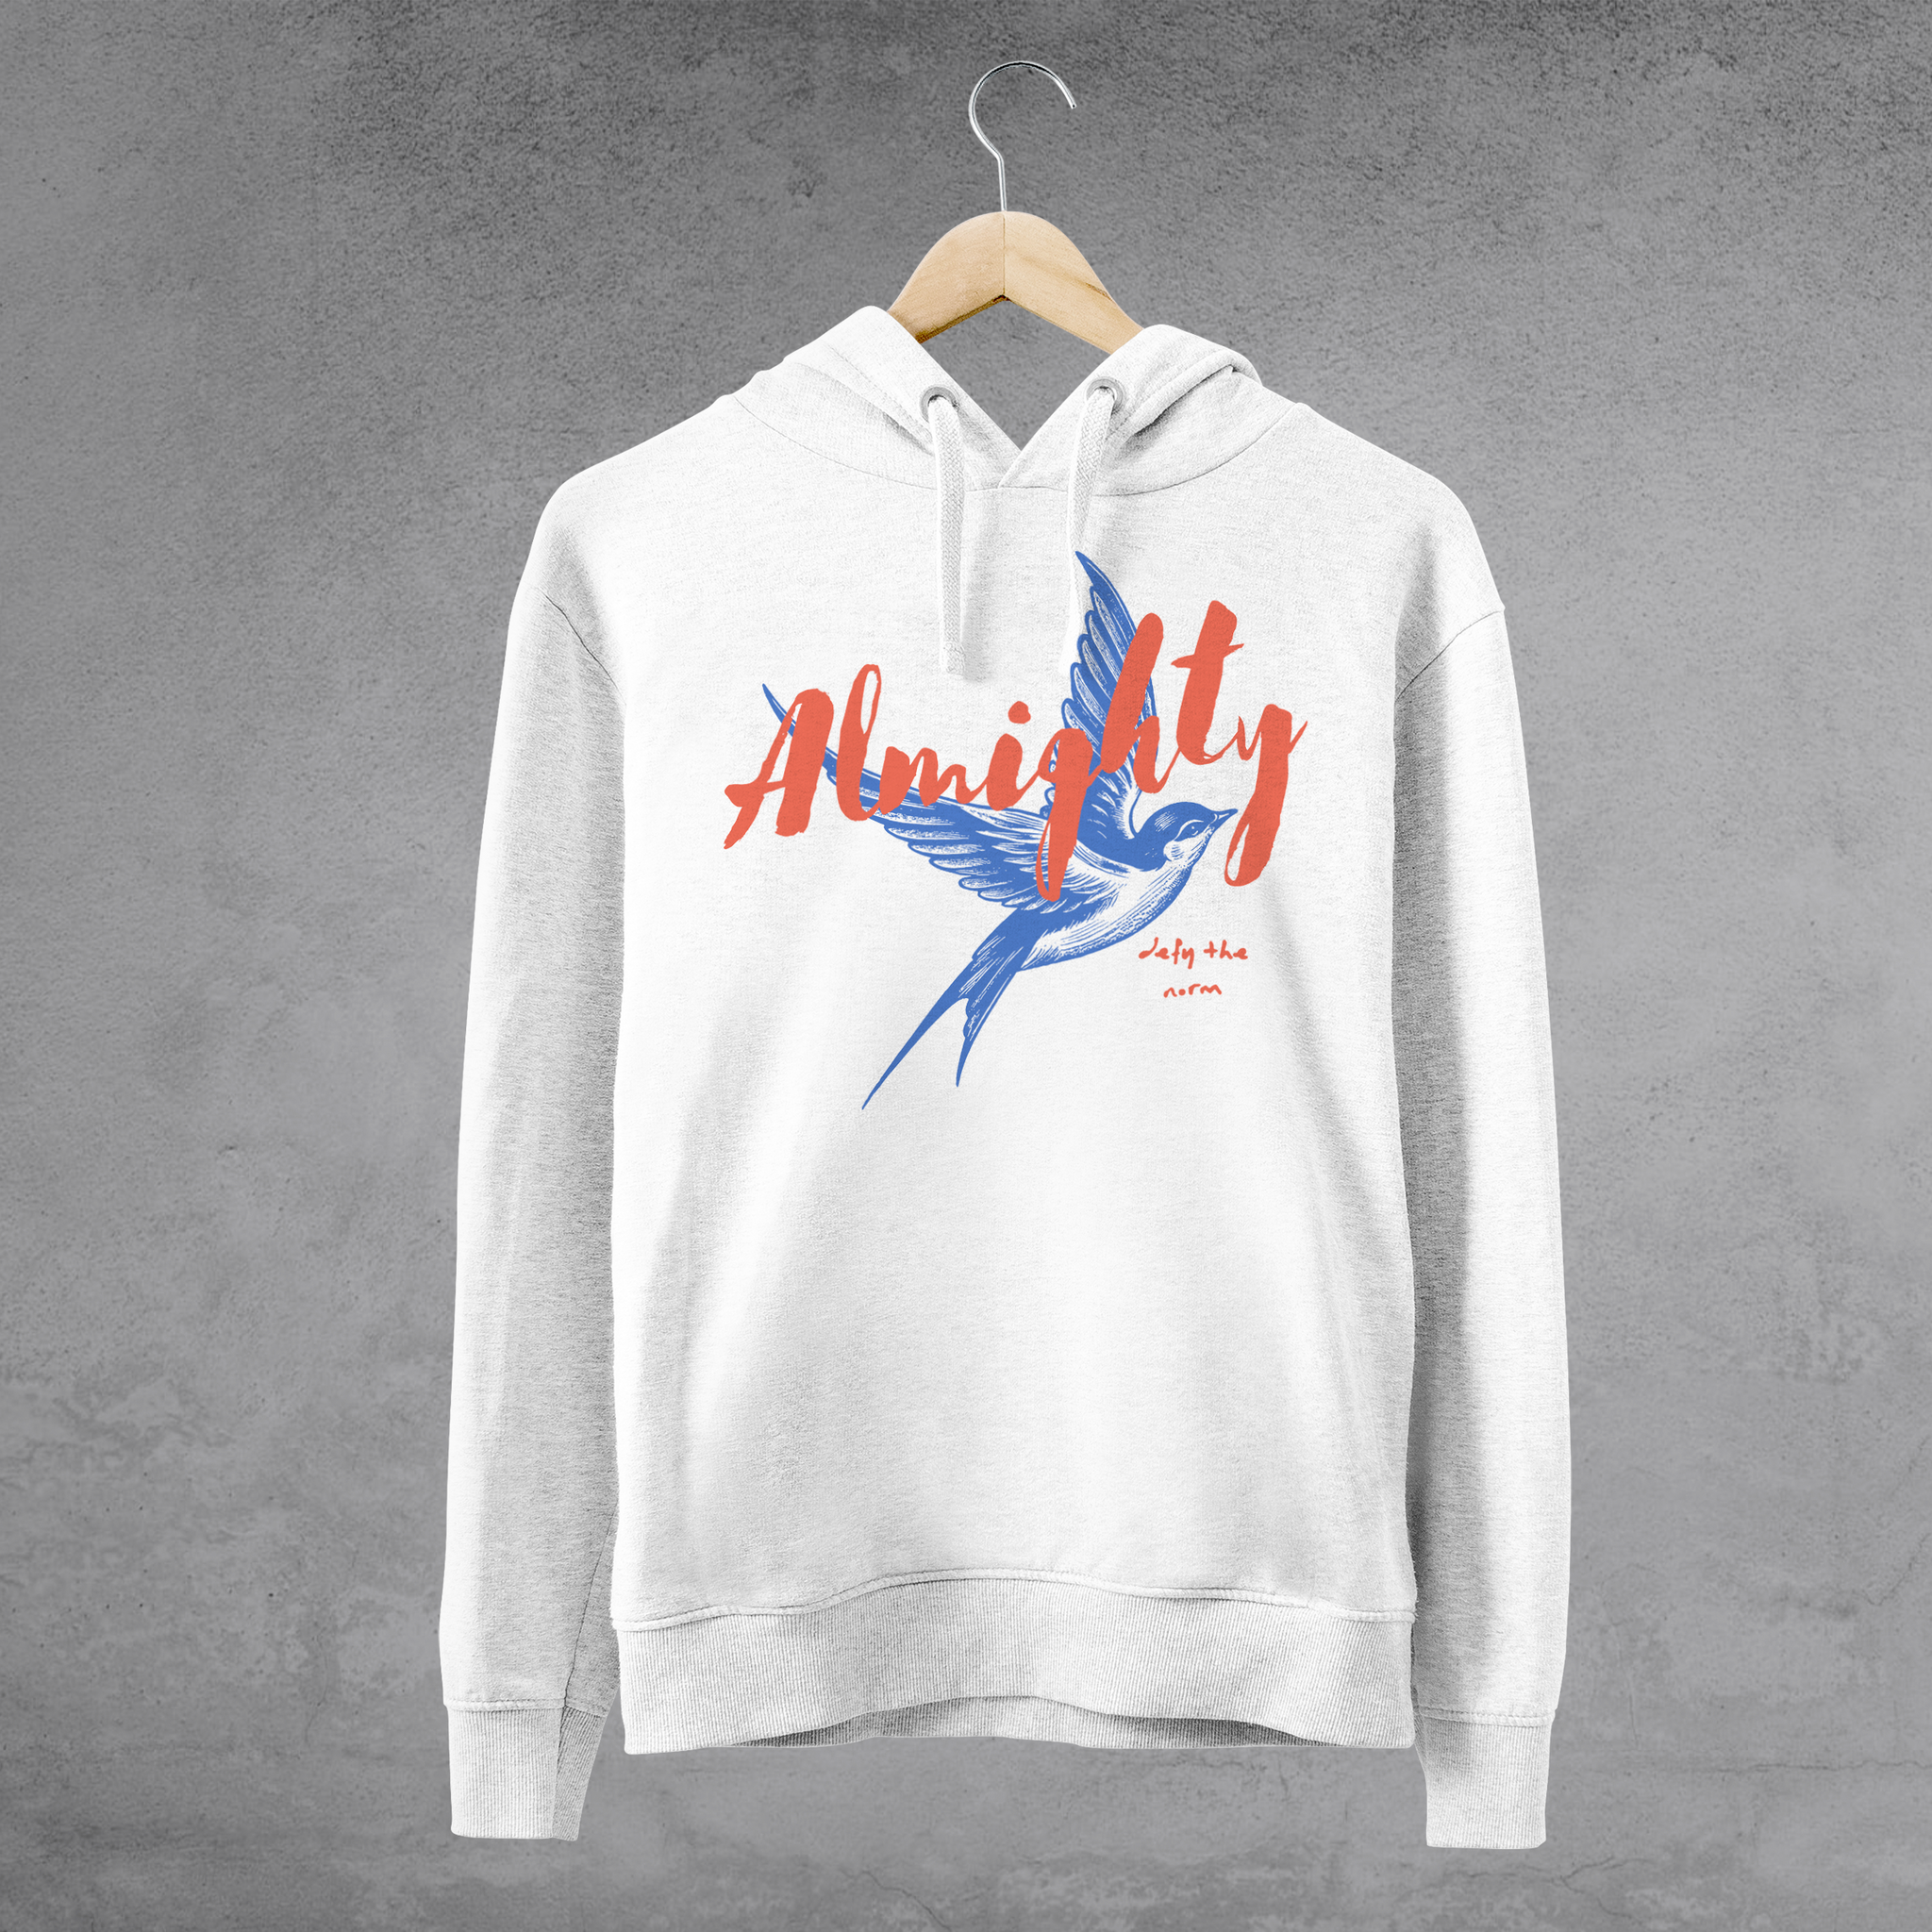 Almighty Wingtail Edition - Hoodie